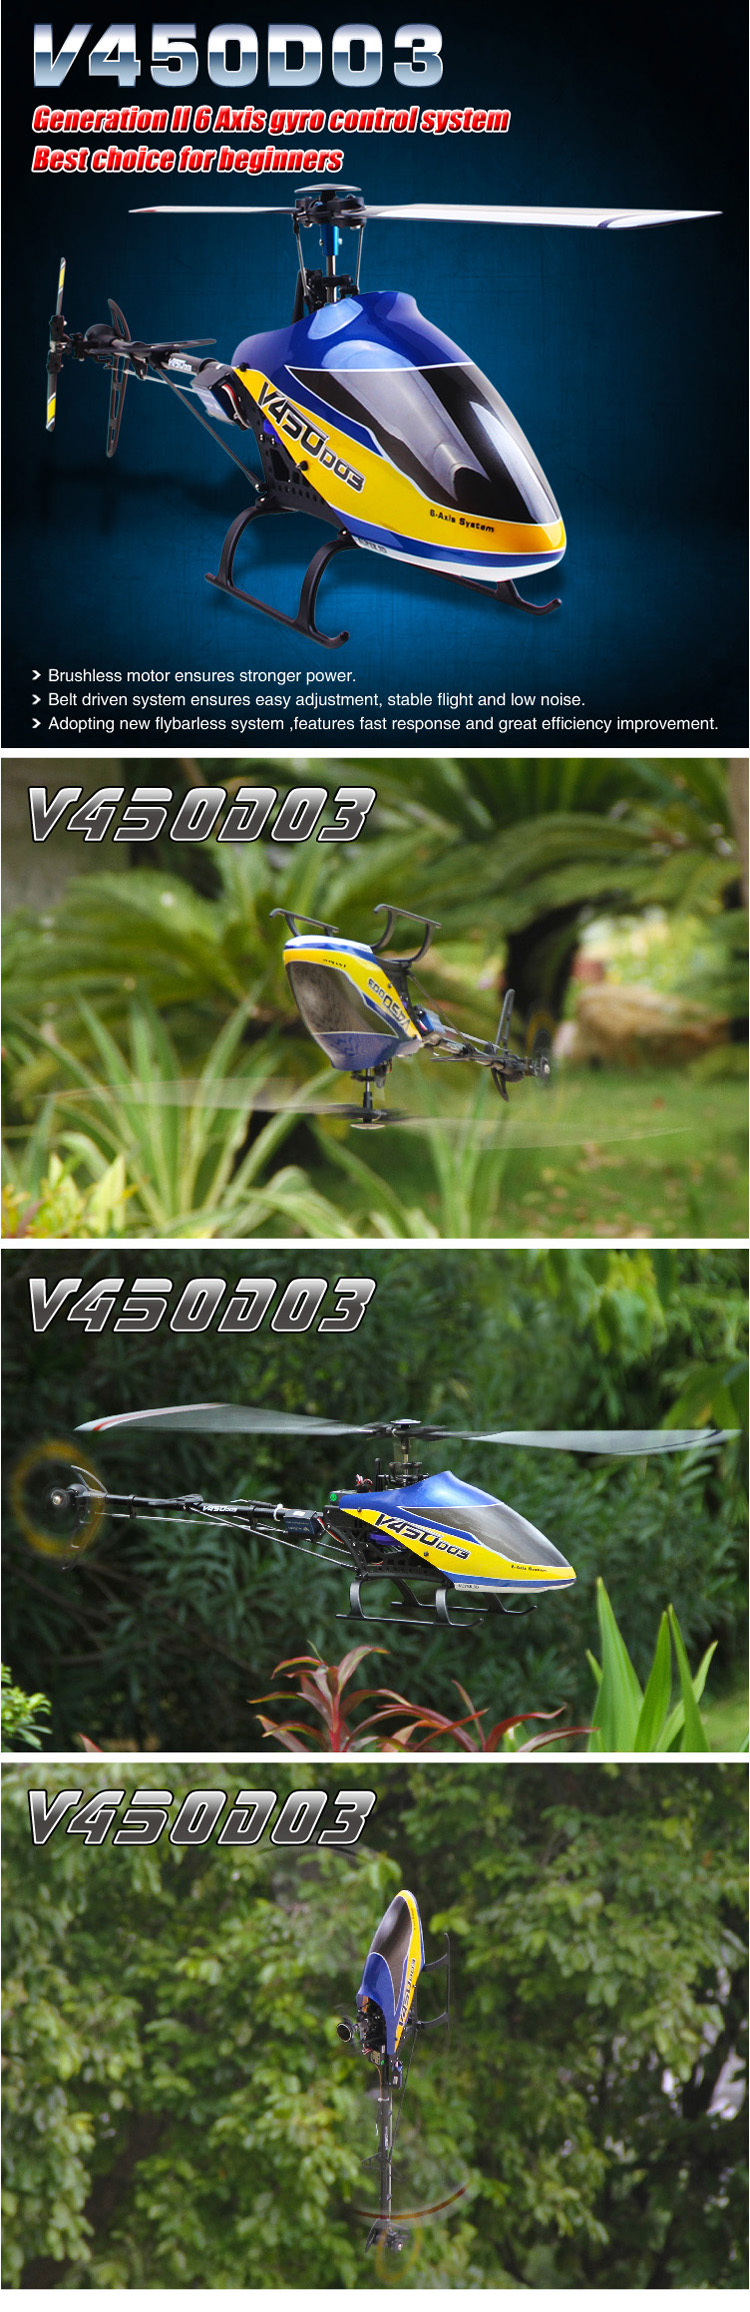 Walkera V450D03 with DEVO 10 Transmitter 6CH 3D 6-axis-Gyro Flybarless Helicopter RTF 2.4Ghz